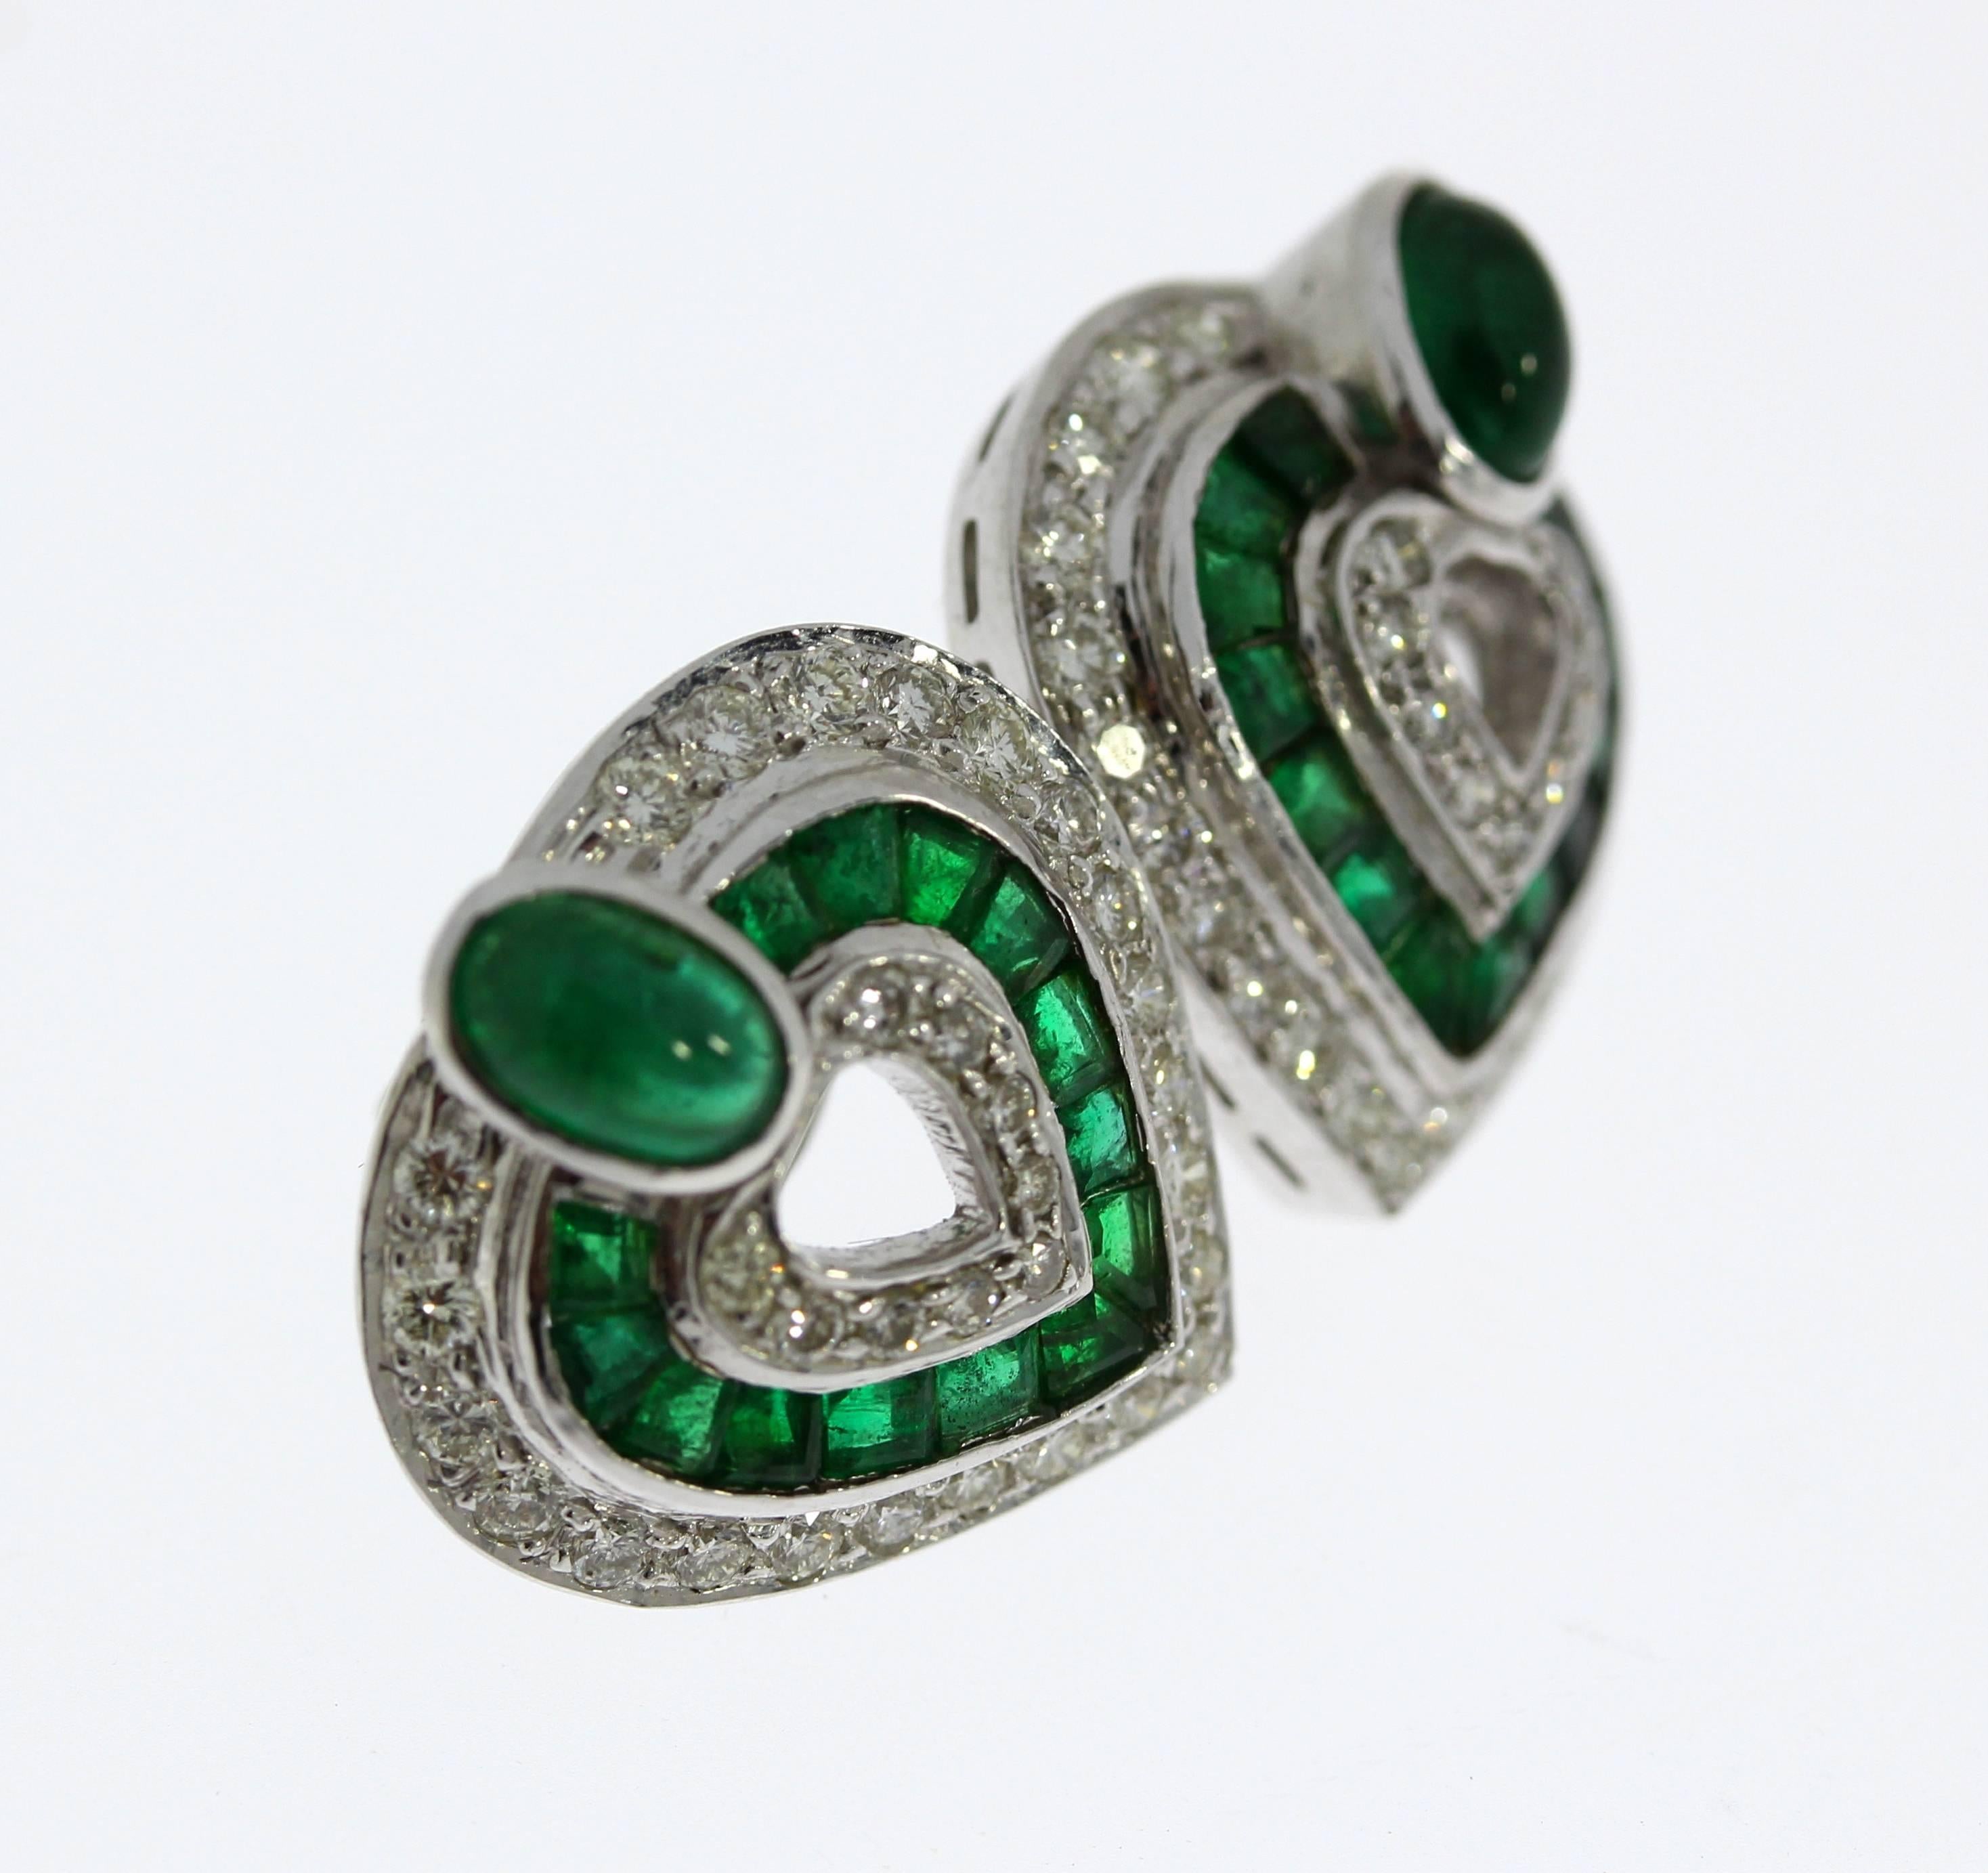 Modern heart-shaped earrings, Italy 2010. 2 oval emeralds in cabochon-cut and 28 emeralds weighing ca. 3,8 carats. 66 brilliant-cut diamonds weighing ca. 1,0 carat. Mounted in 18K white gold. Weight: 9,75 g.
Measurements: 0.94 x 0.63 in ( 2,4 x 1,6